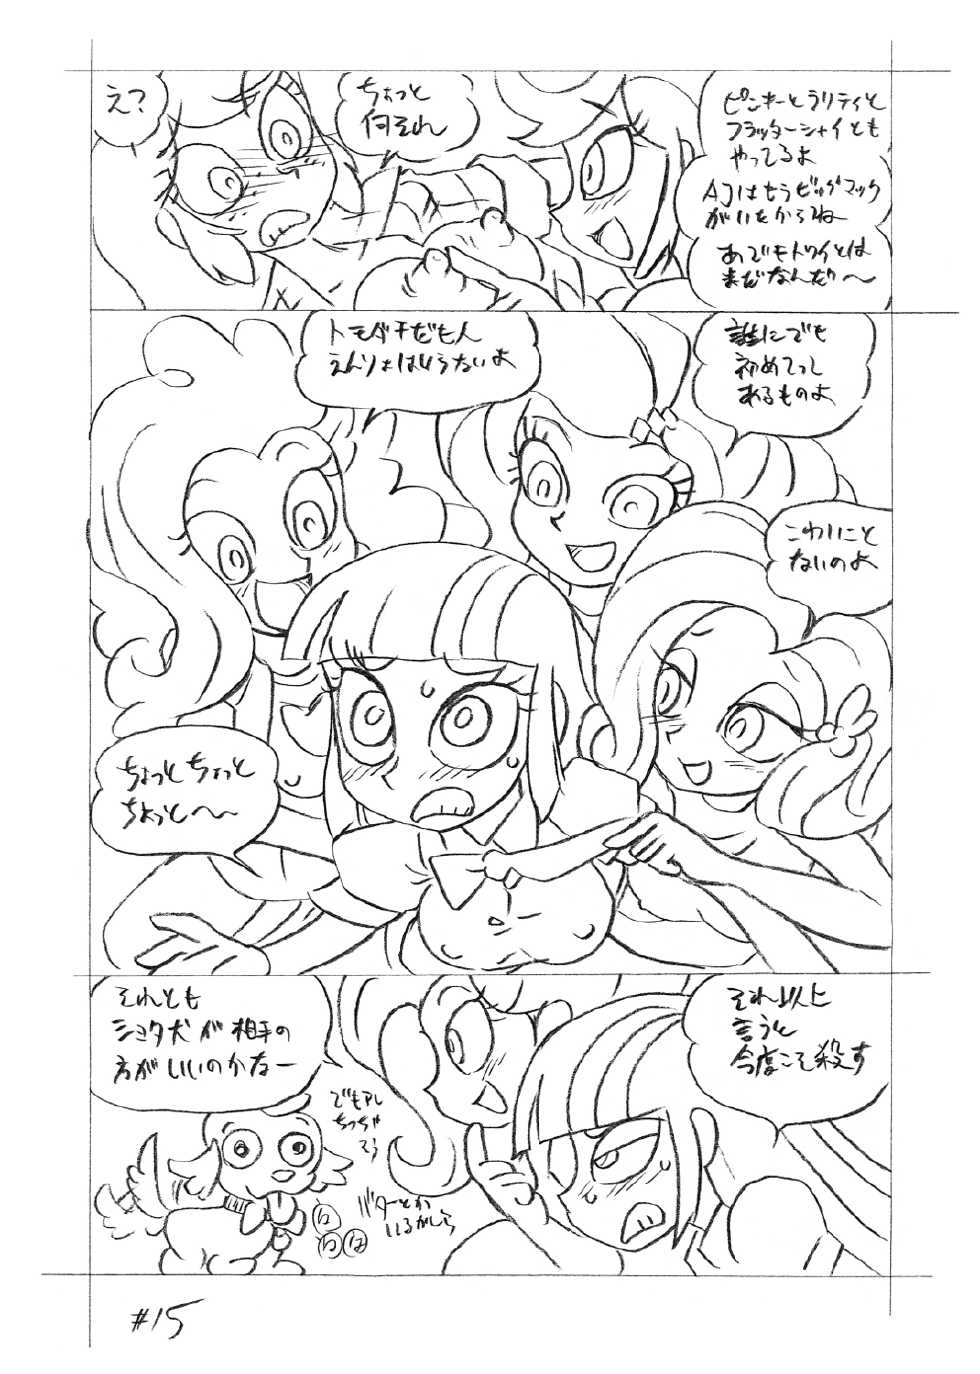 [Union of the Snake (Shinda Mane)] Psychosomatic Counterfeit EX- A.J. in E.G. Style (Ver. 02) (My Little Pony: Friendship Is Magic) - Page 14